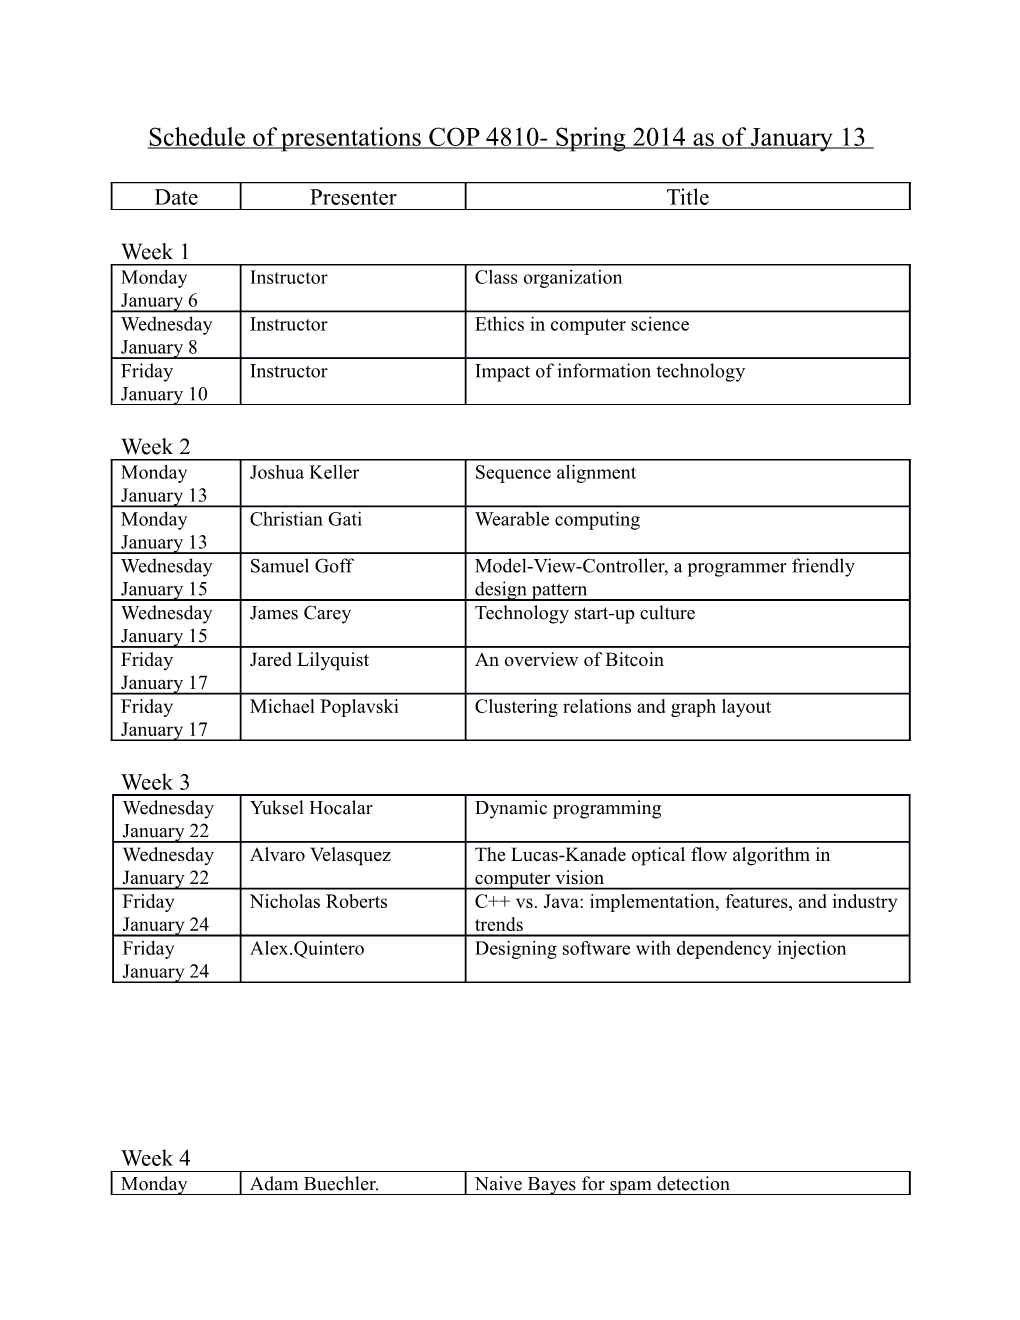 Schedule of Presentations COP 4810-Spring 2014 As of January 13